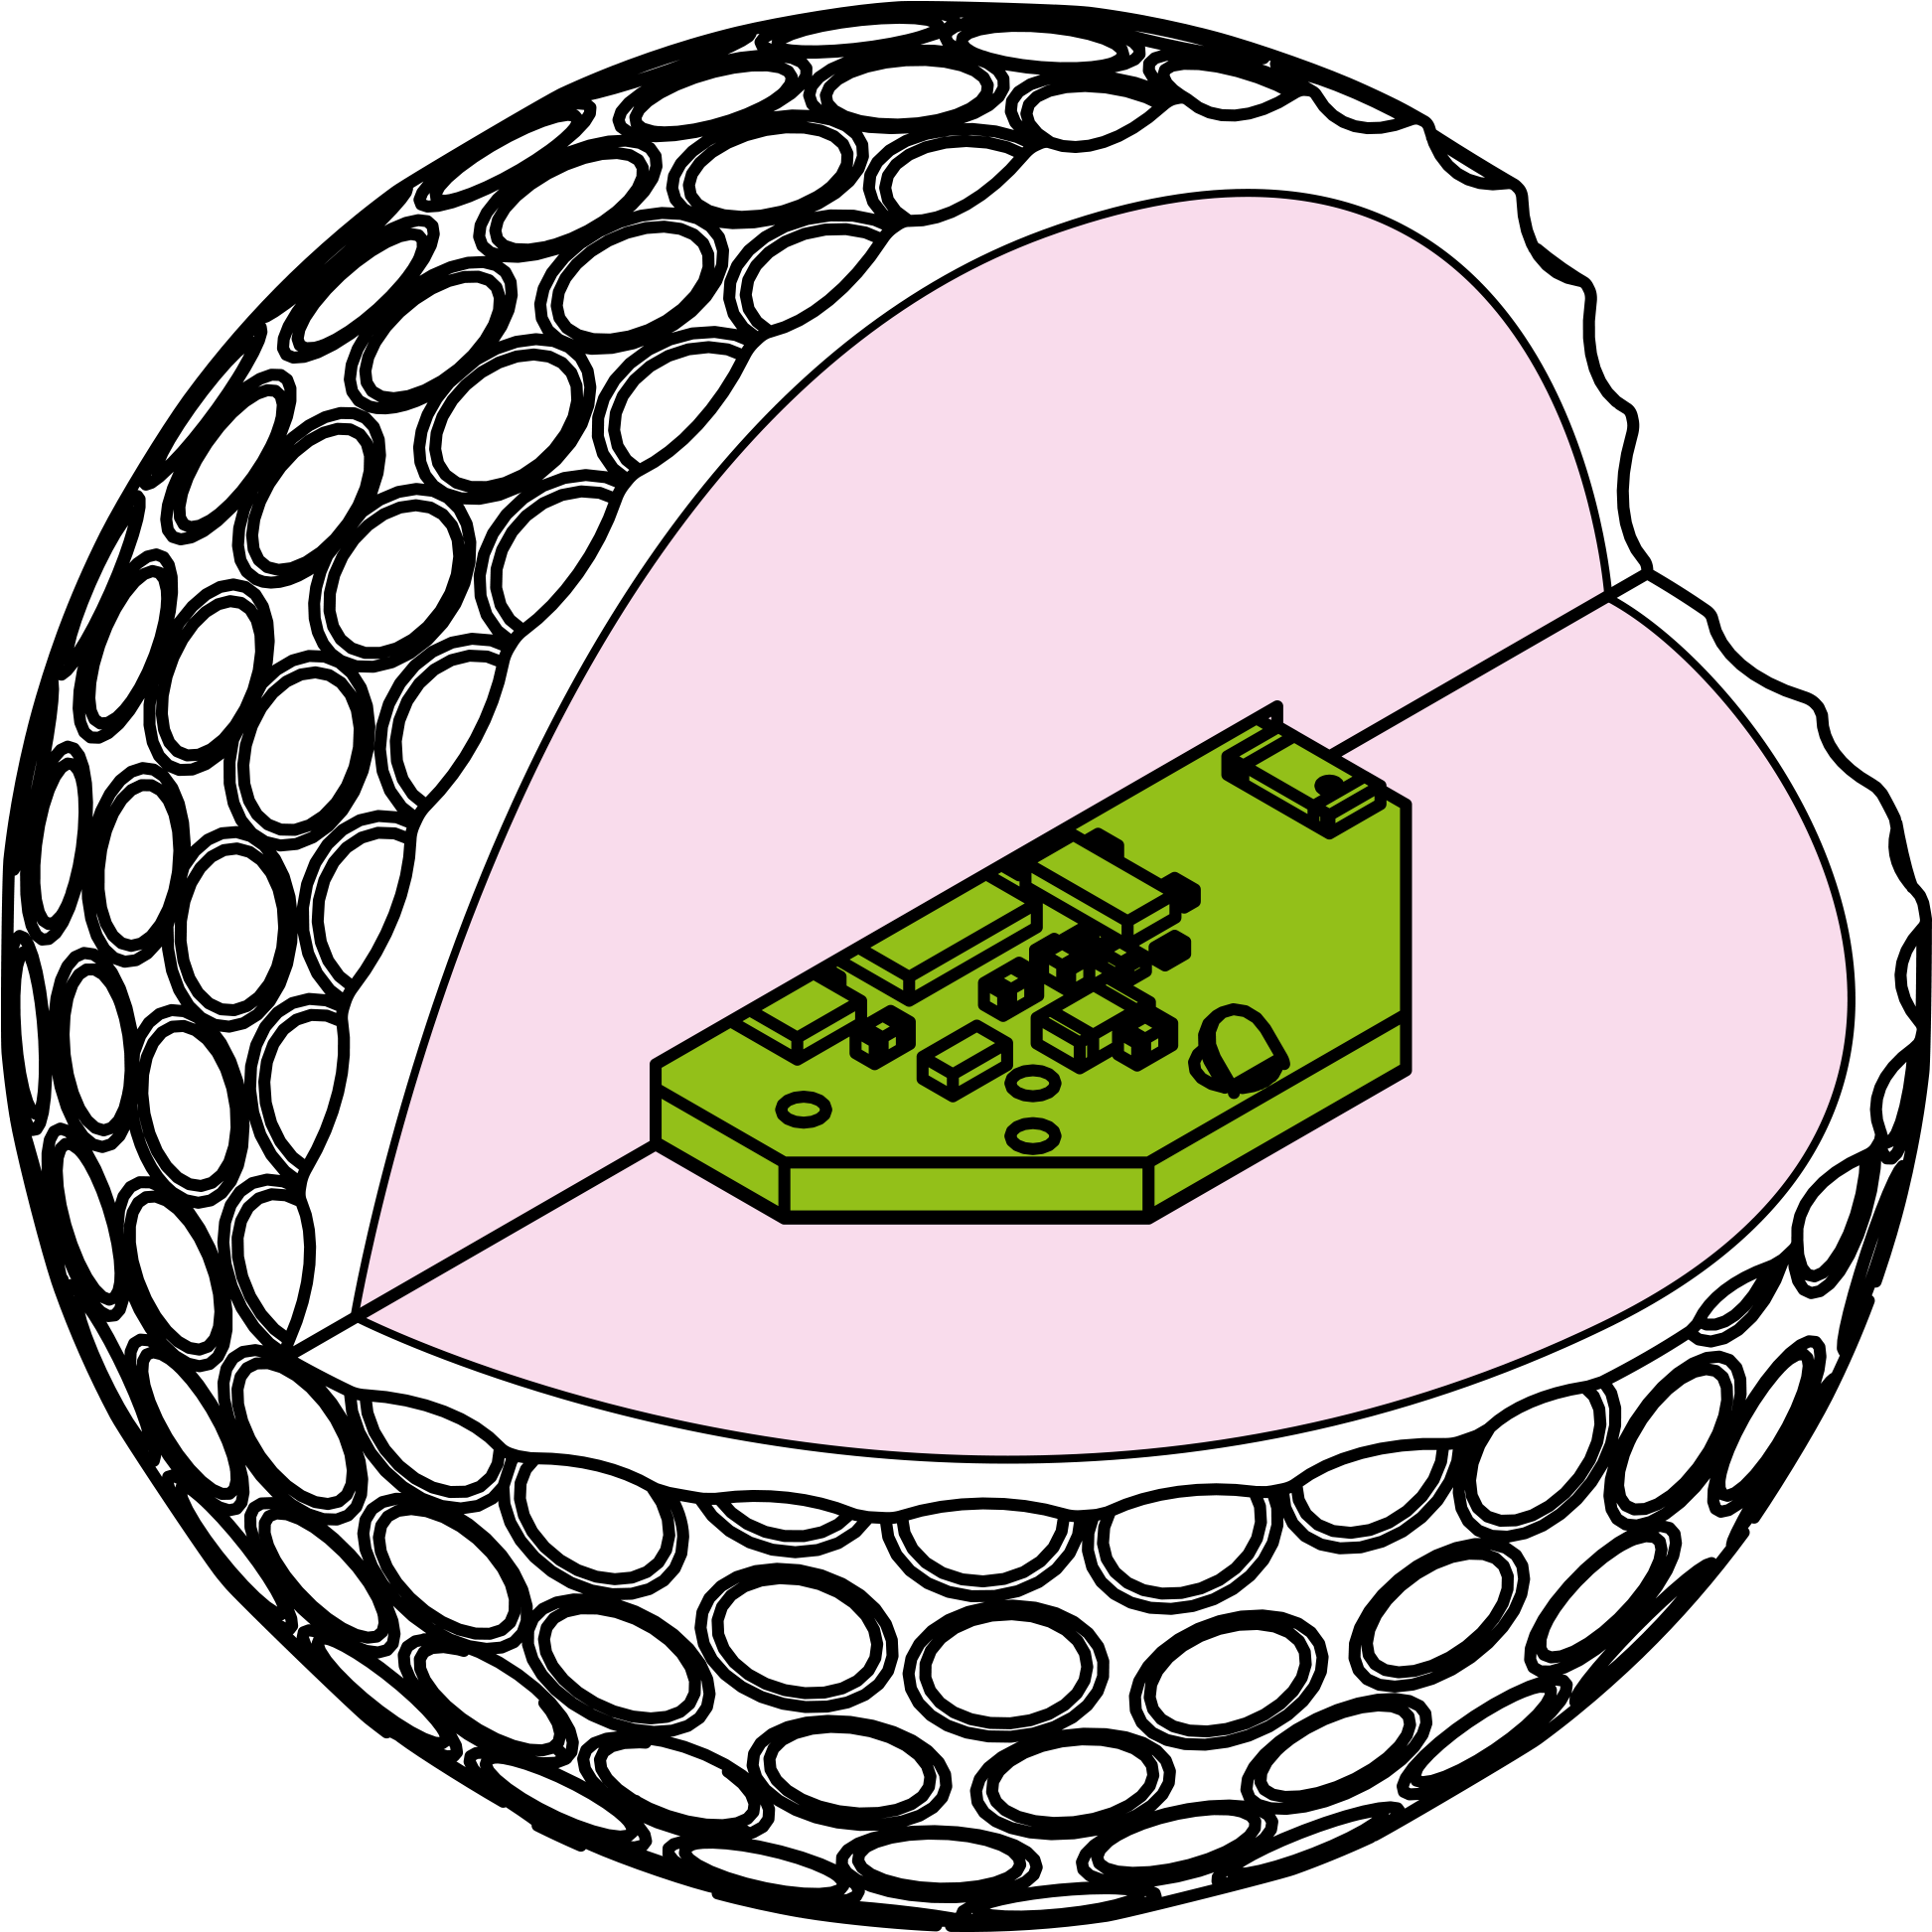 The Neverlost Golf Ball Looks, Weighs, And Behaves - Never Lost Golf Ball (2048x2048)